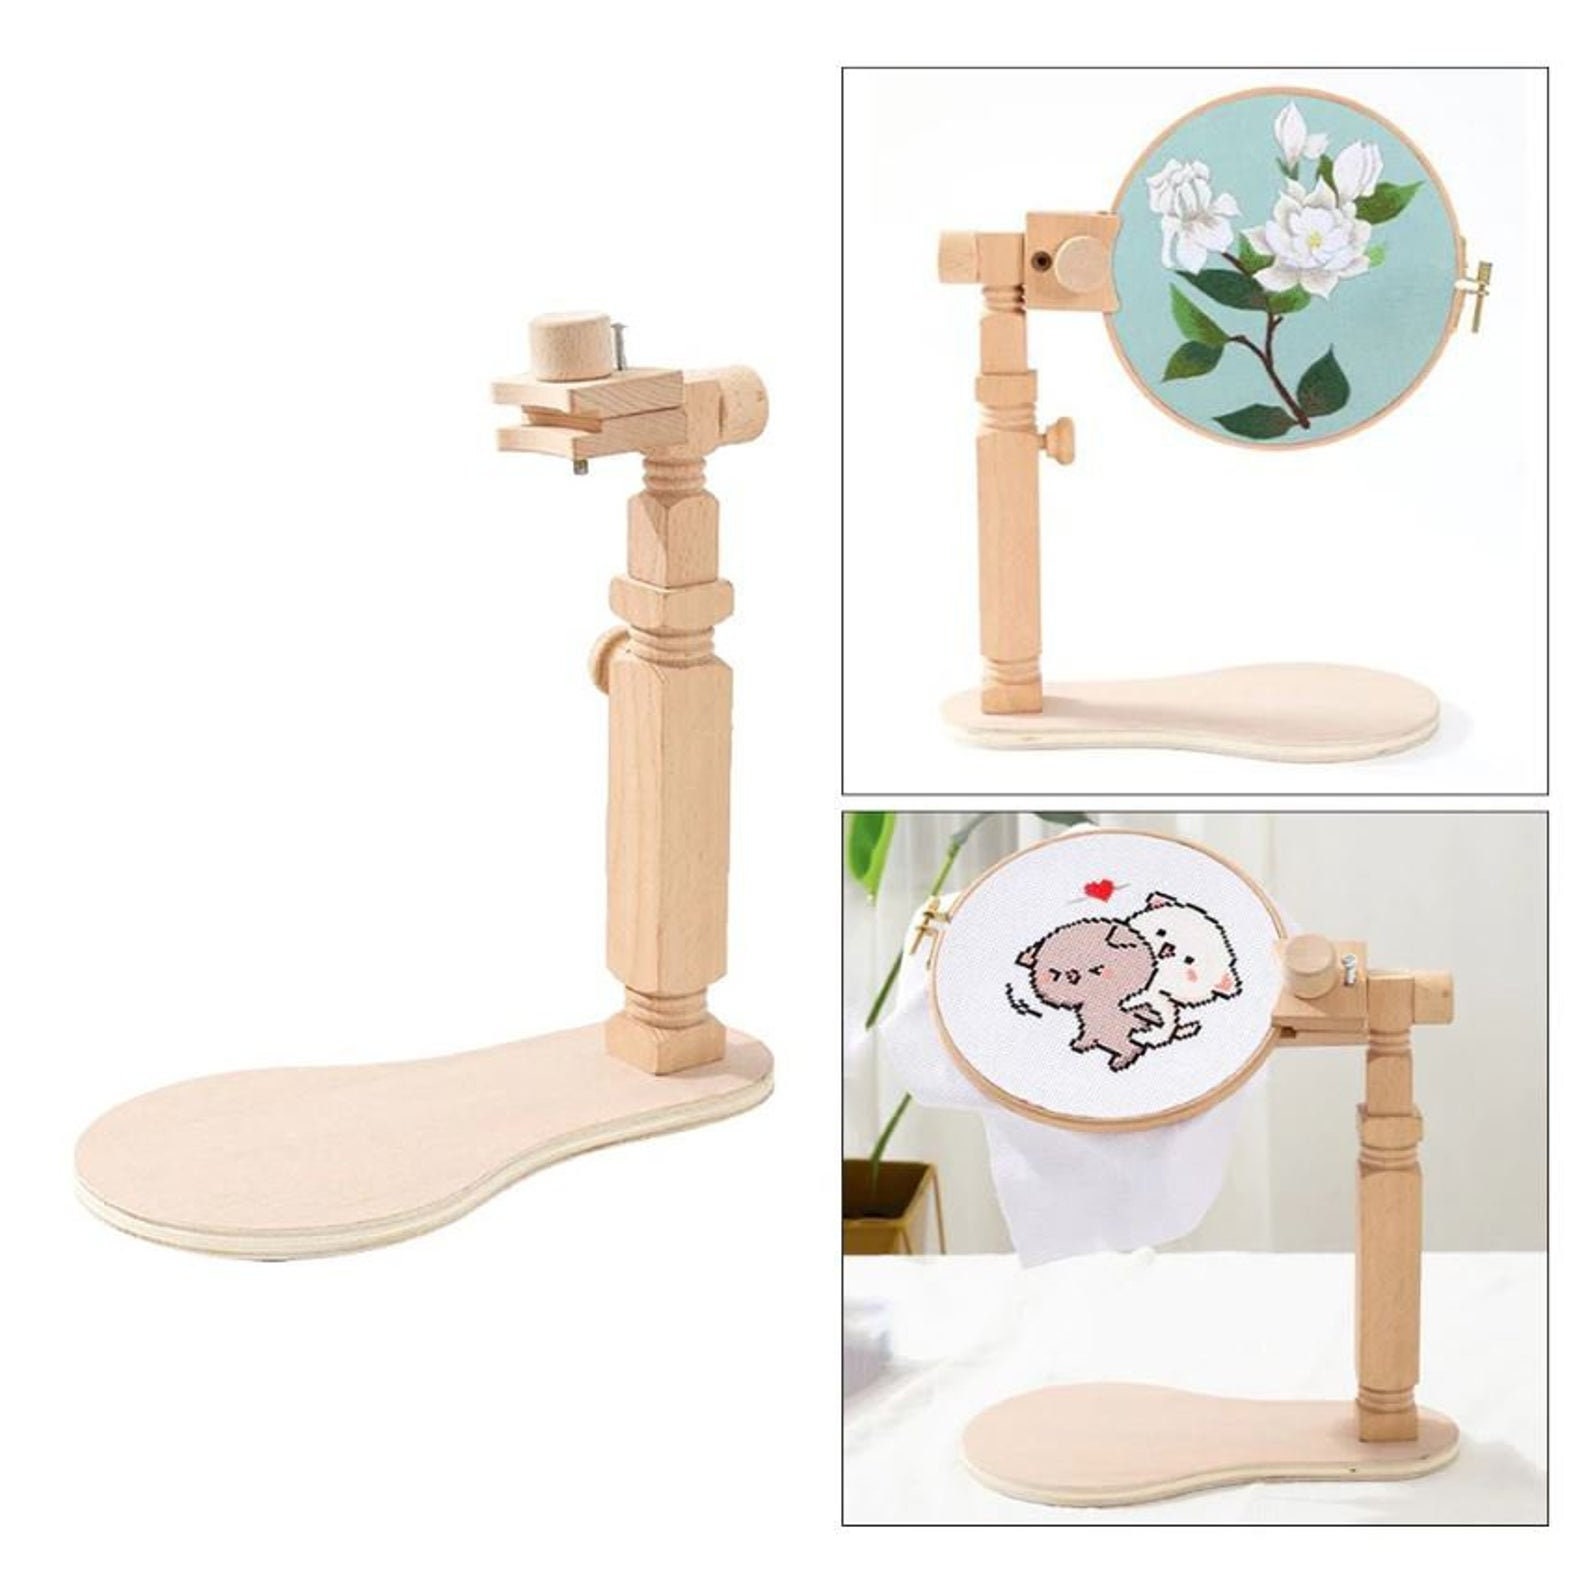 Embroidery Hoop Stand Cross Stitch Stand Adjustable Holder Height